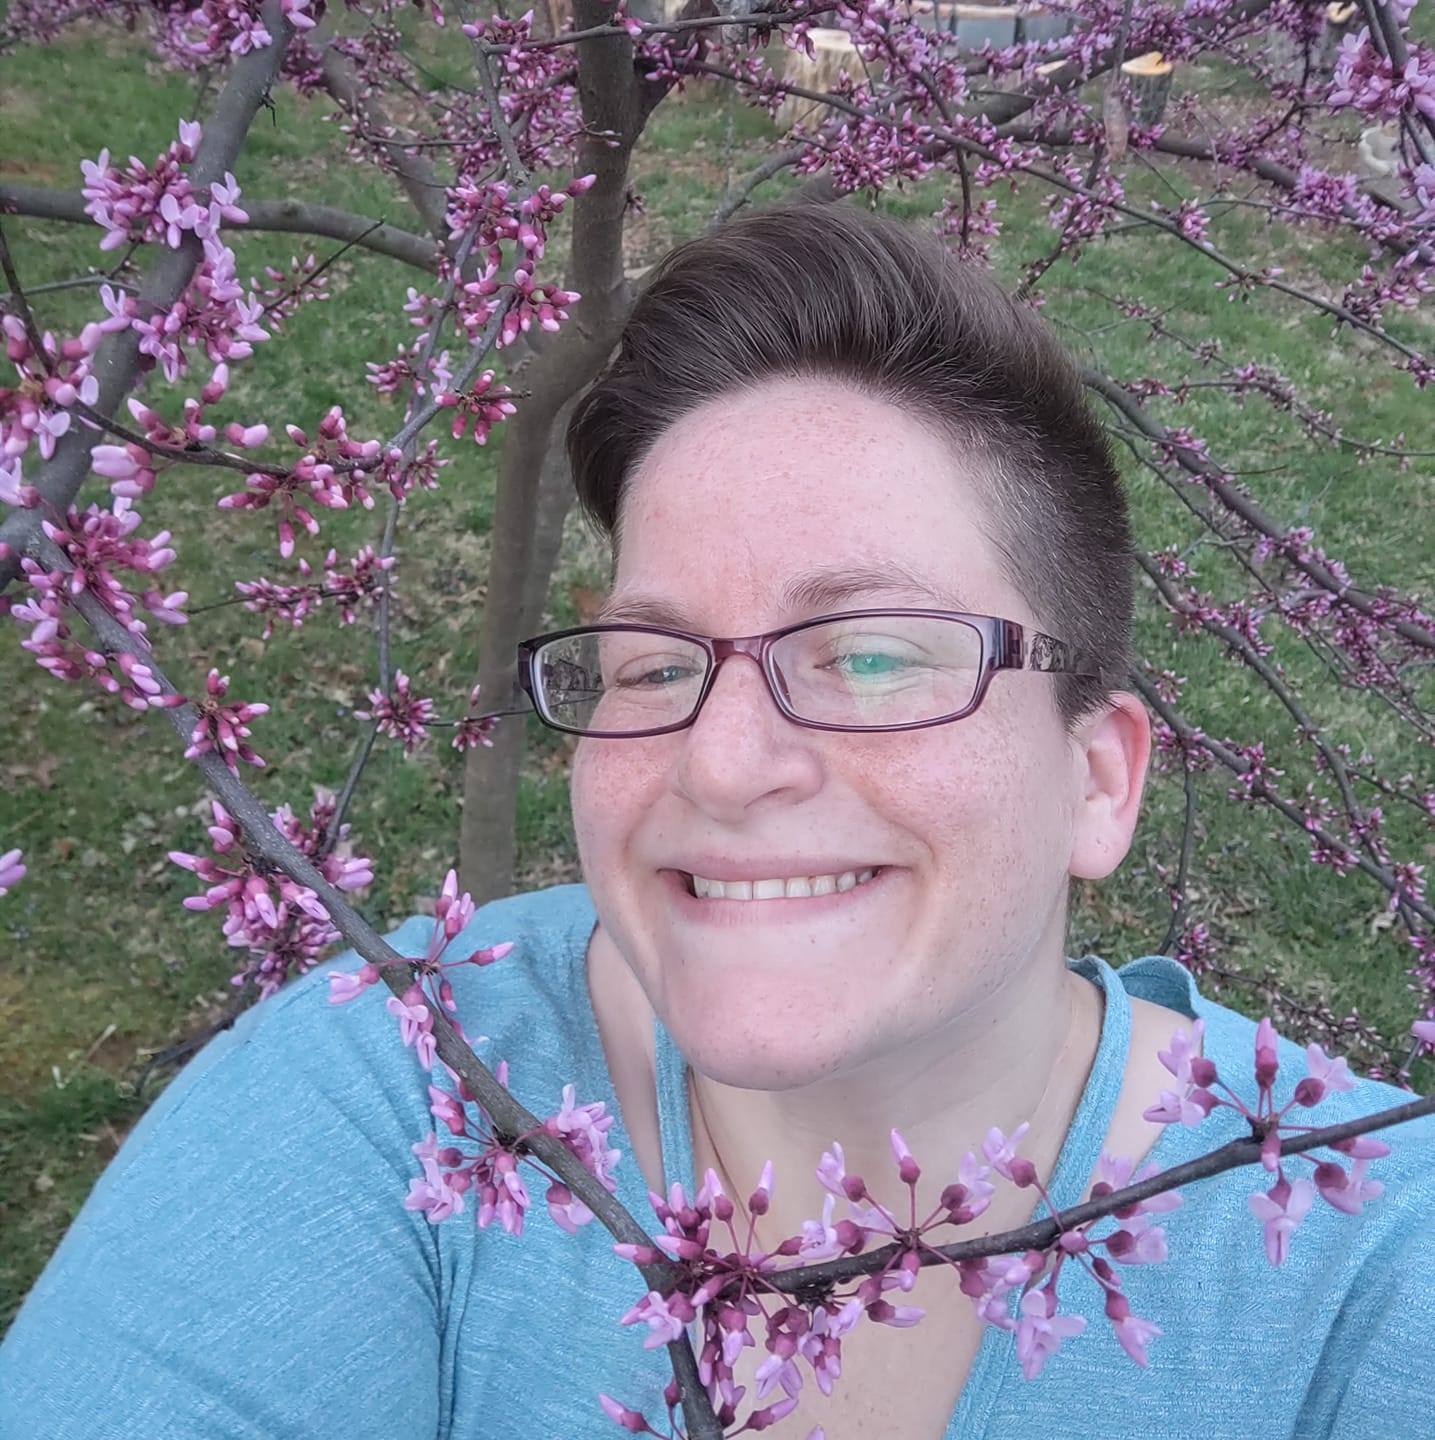 Hannah Bement smiling at the camera from under flowering branches.